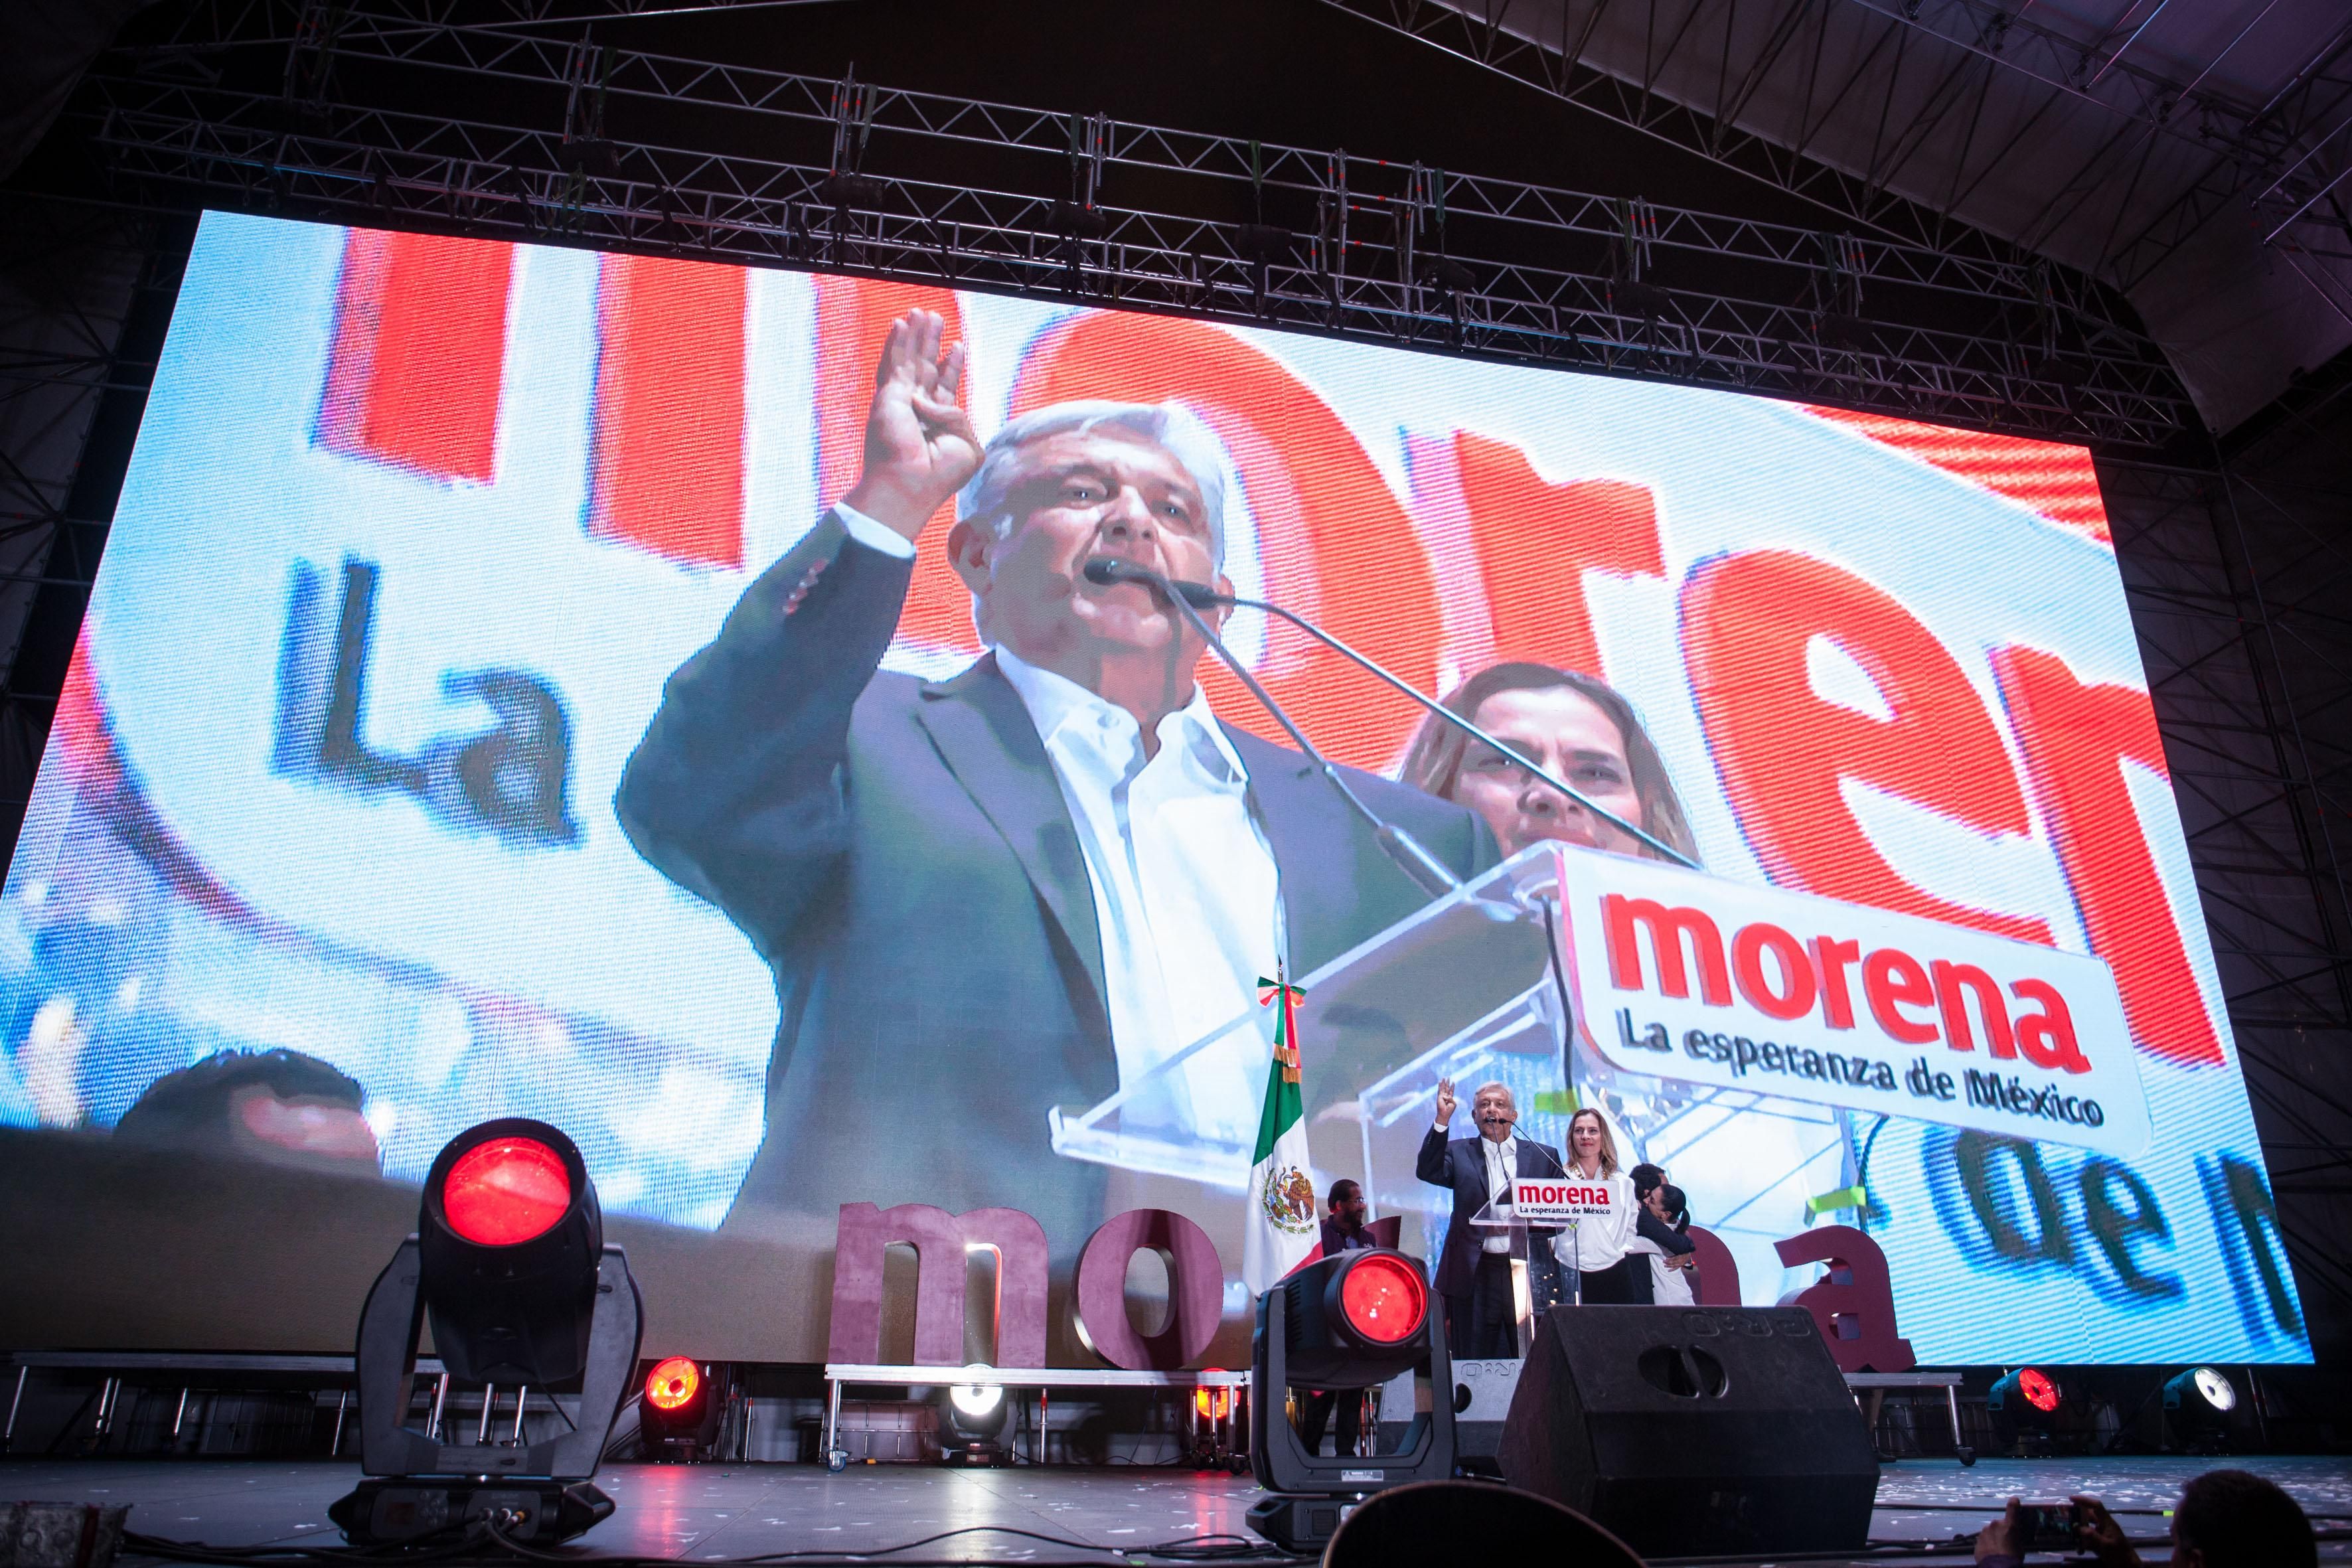 President elect of Mexico, Andres Manuel Lopez Obrador speaks during the celebration event, at the end of the Mexico 2018 Presidential Election on July 1, 2018 in Mexico City, Mexico.